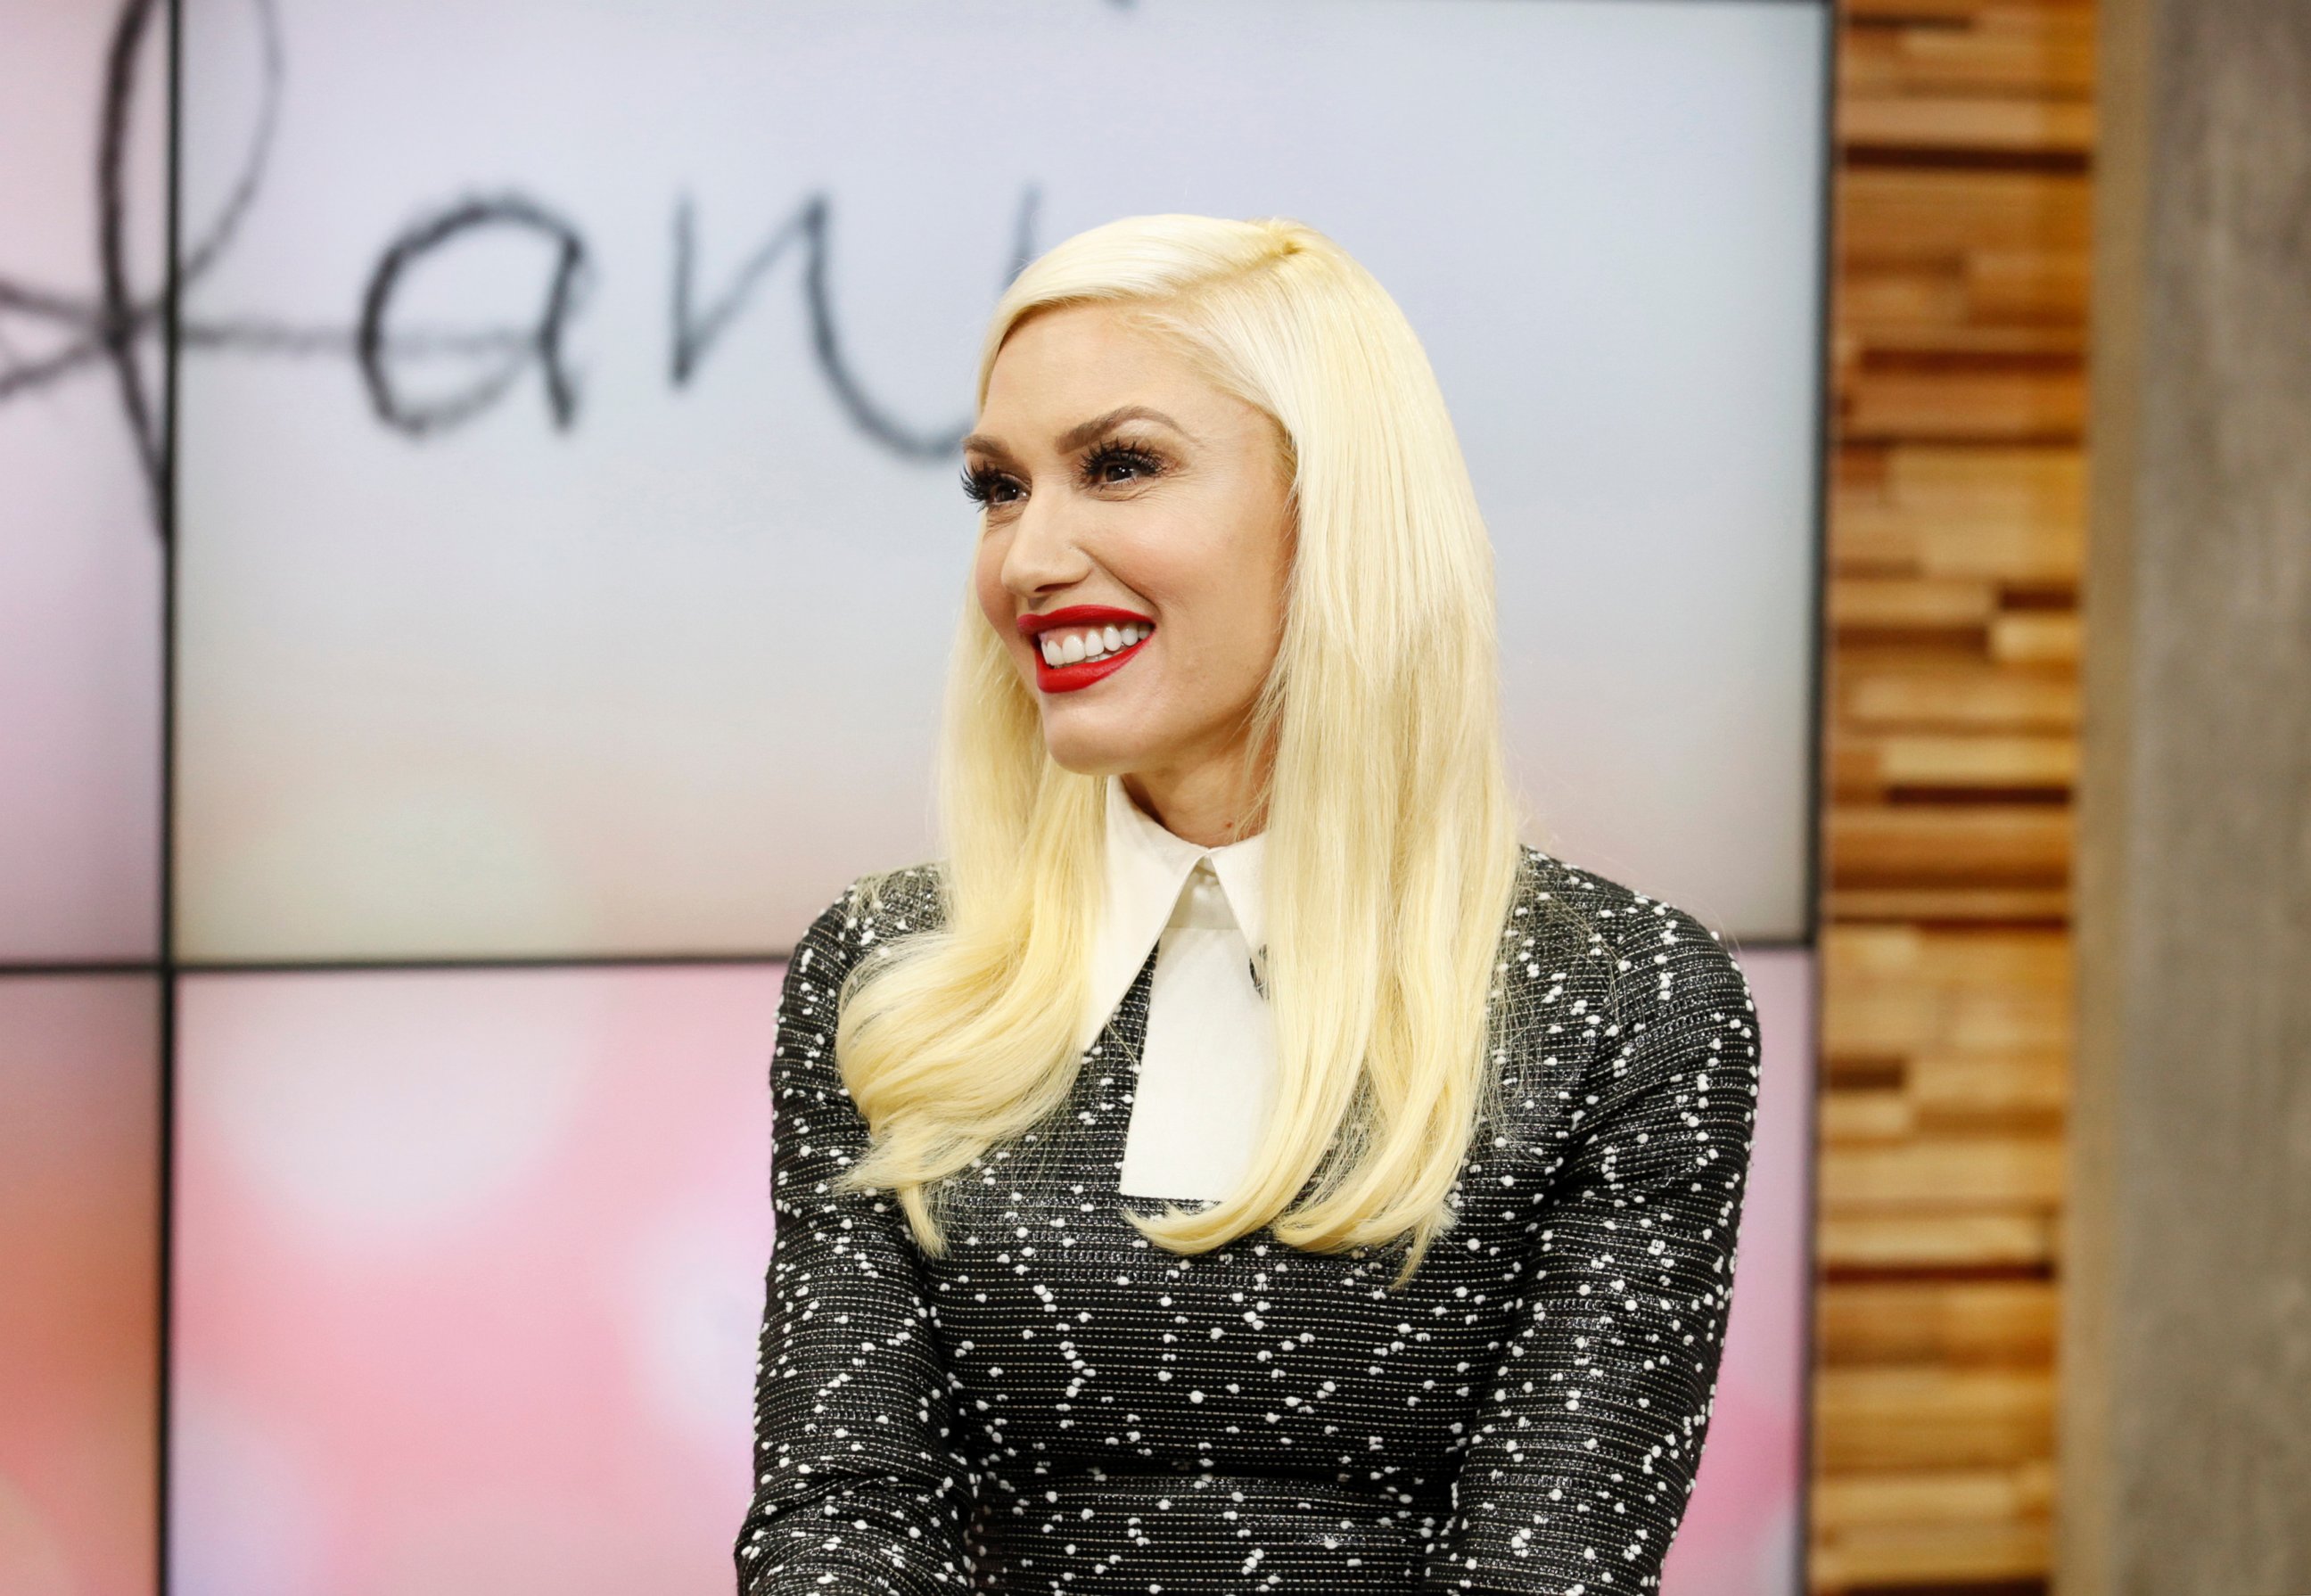 PHOTO: Singer Gwen Stefani talks with "Good Morning America's Lara Spencer about the inspiration for her new album, "This Is What the Truth Feels Like."